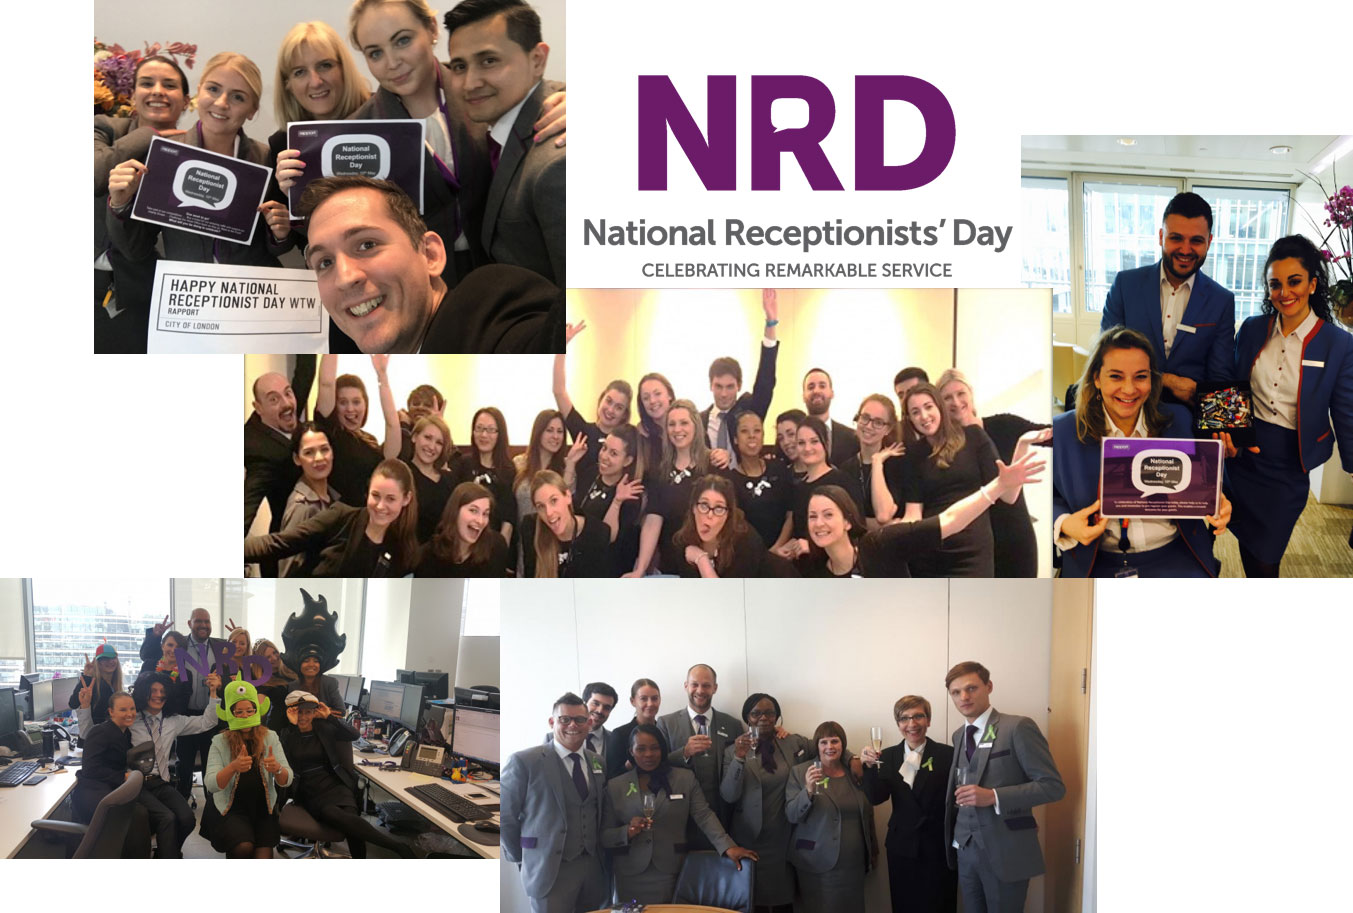 Rapport supports National Receptionists’ Day 2017